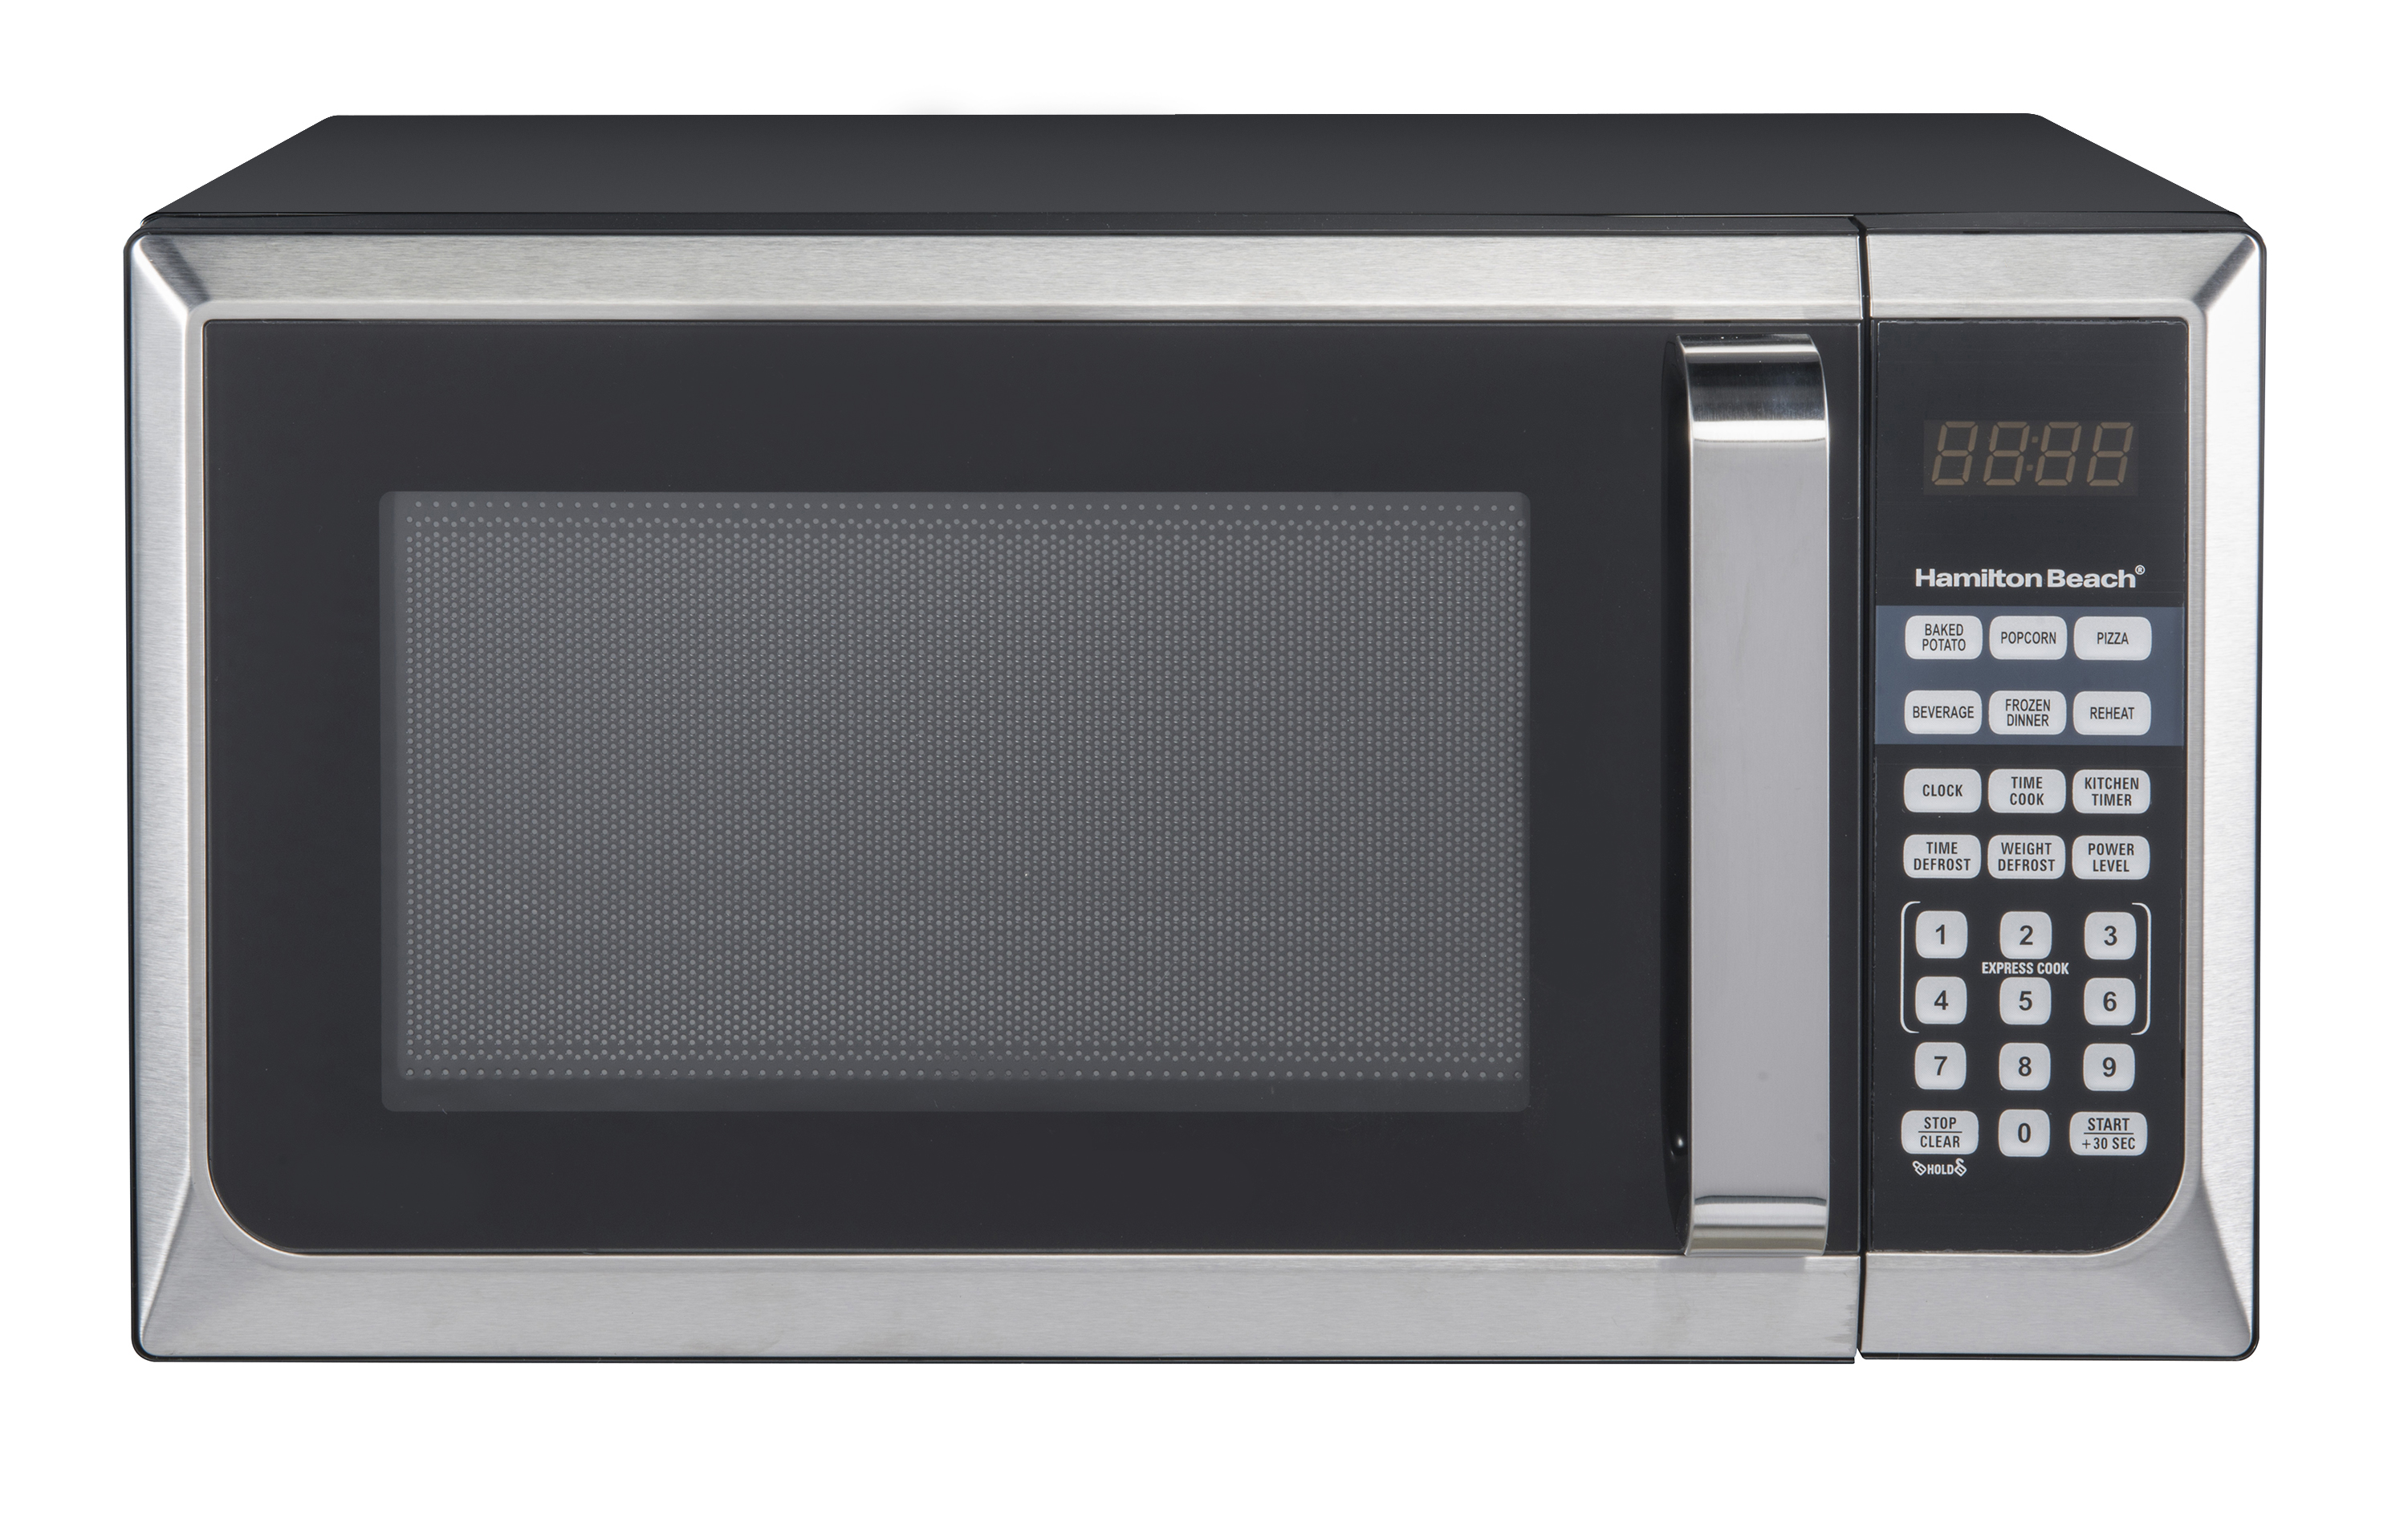 Hamilton Beach 0.9 Cu ft Countertop Microwave Oven in Stainless Steel, New - image 1 of 7